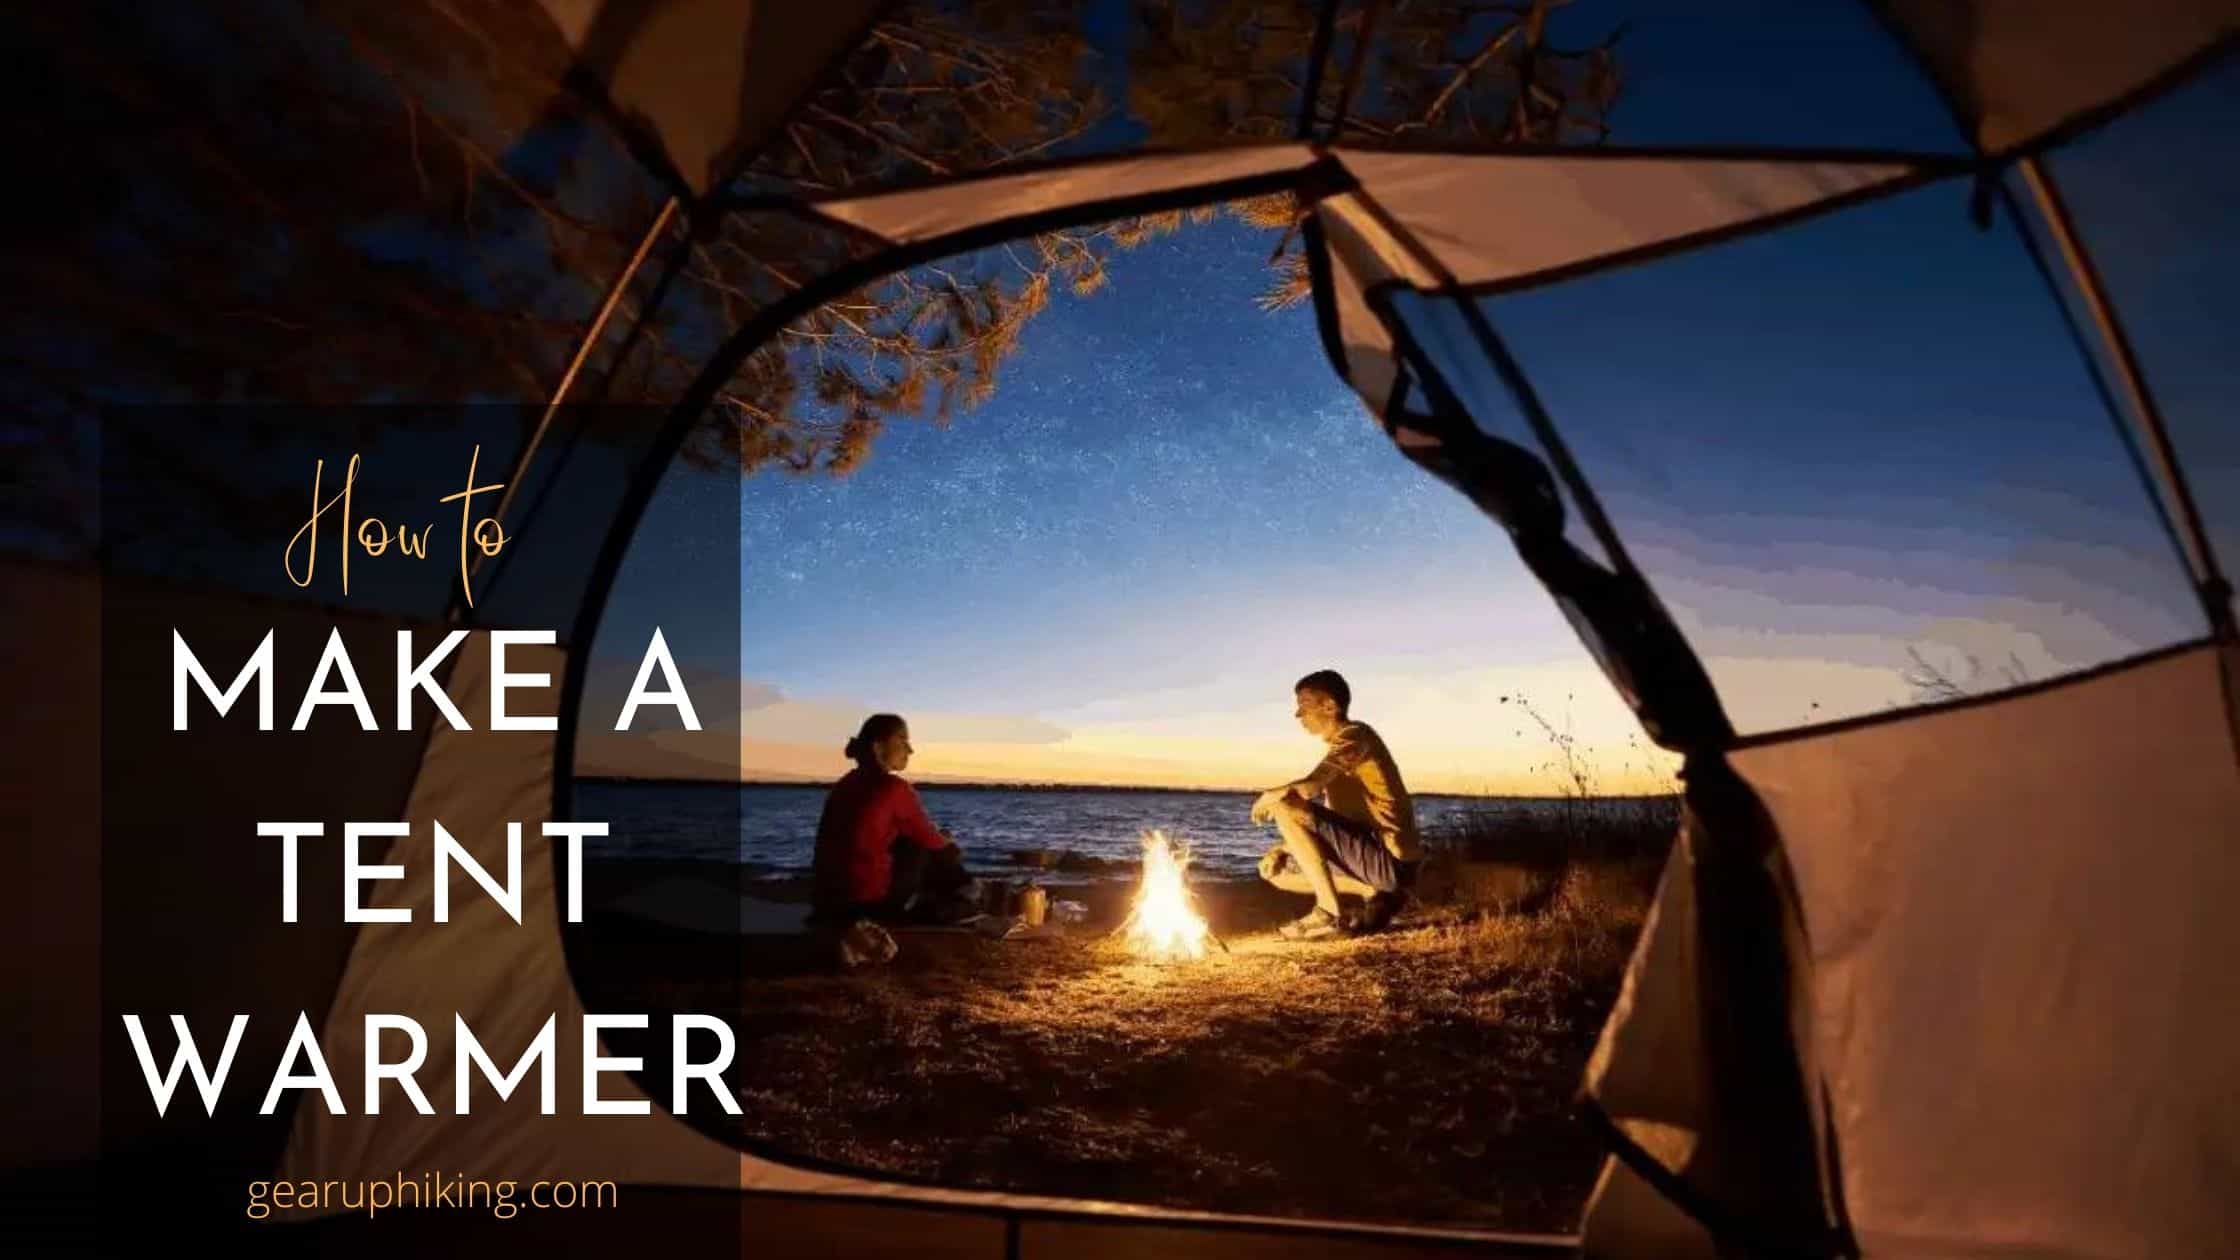 How to Make a Tent Warmer